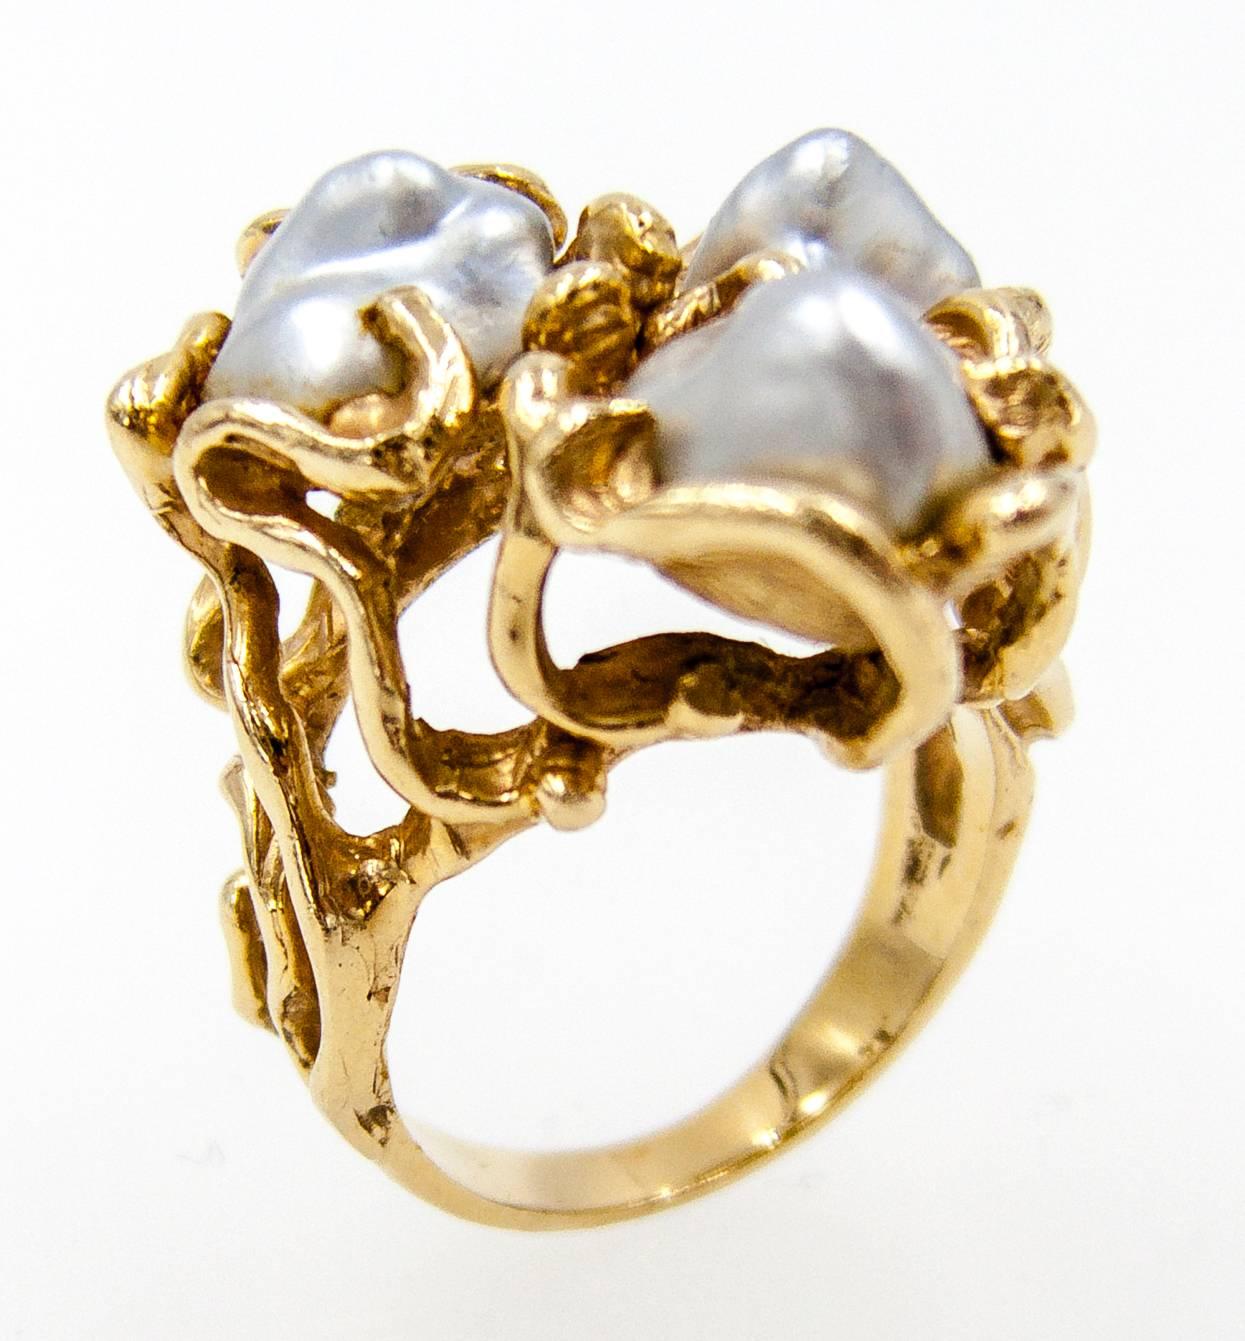    A flashback to the 60's, this ring is a fun example of studio created jewels of the decade.   Three freshwater pearls, probably sourced from the Mississippi River, are caged within asymmetrical fronds of 14 karat yellow gold.   The ring is size 6